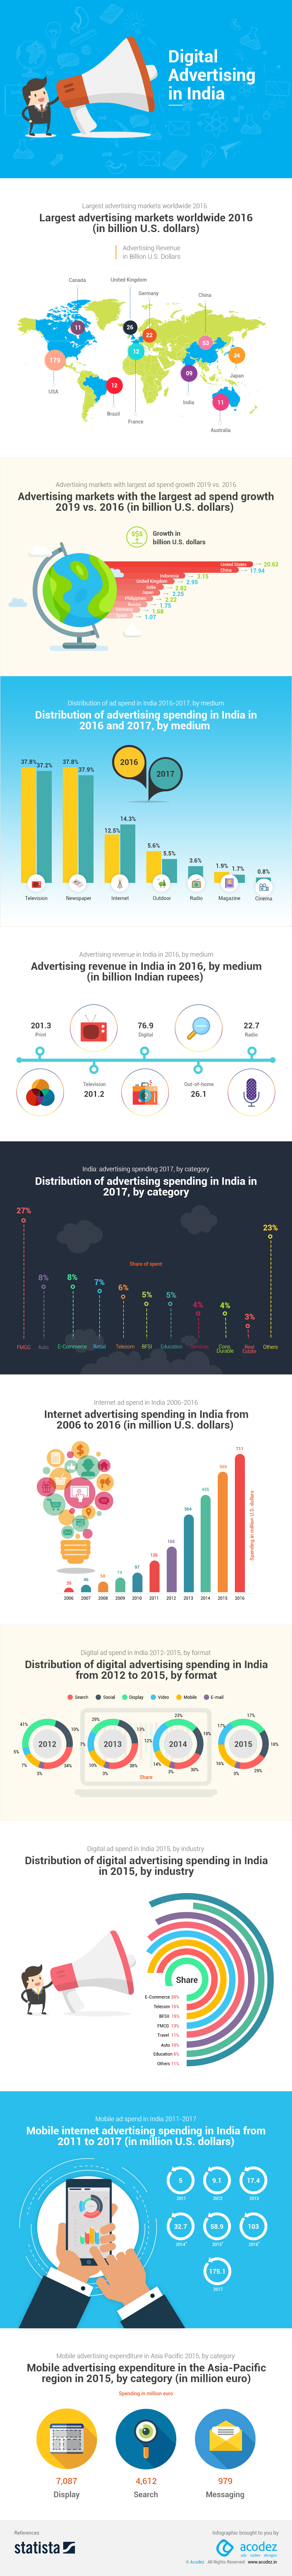 Infographics - Digital Advertising in India